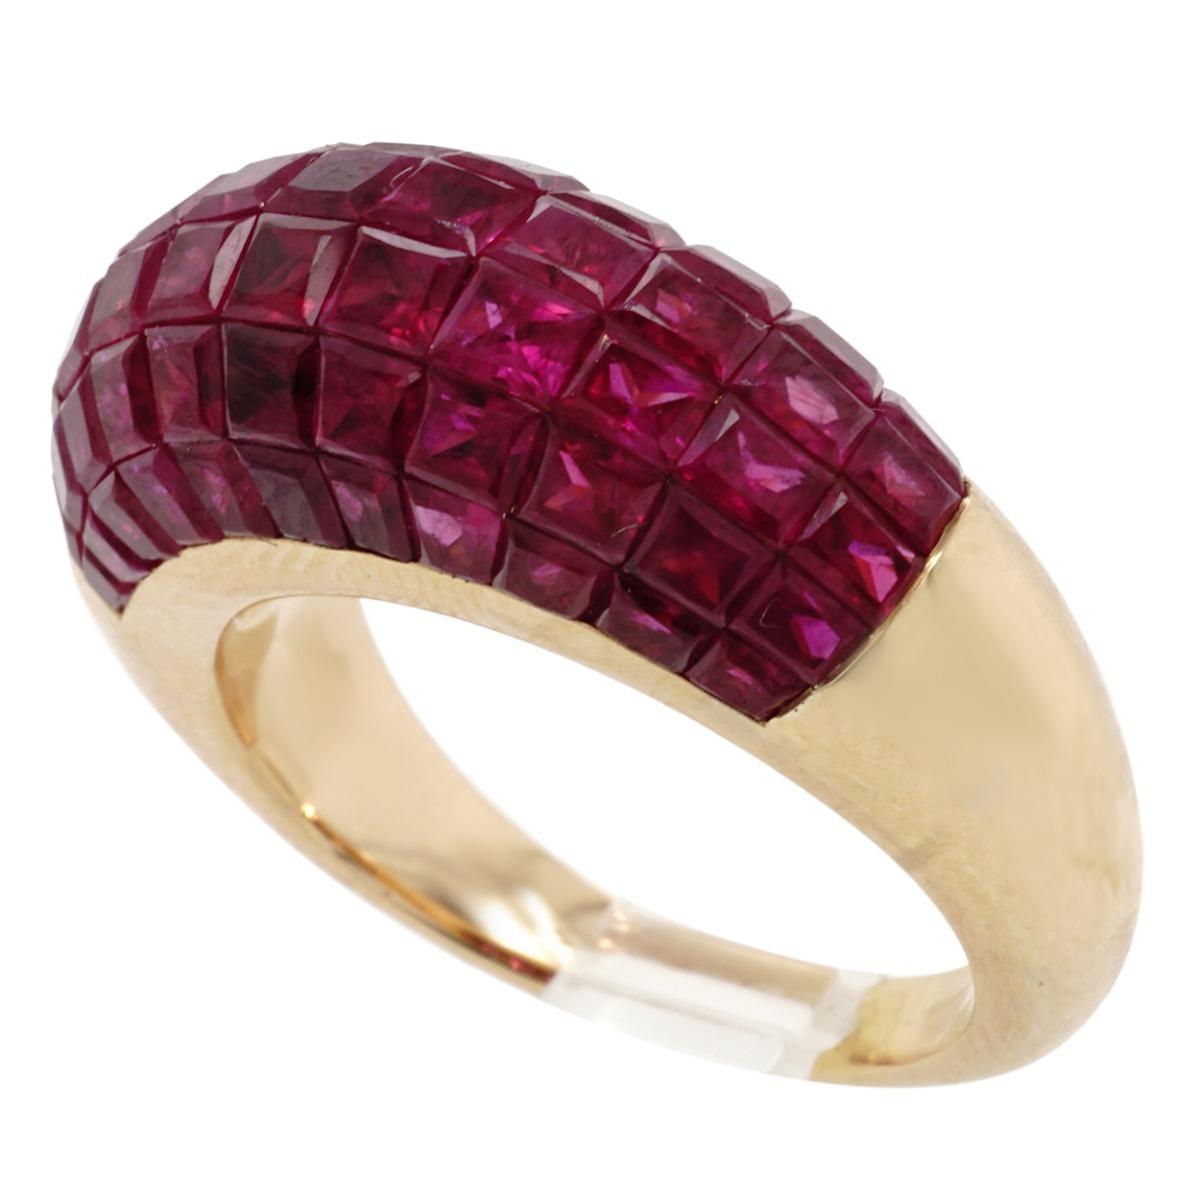 Crafted in 18 karat yellow gold featuring invisibly set calibrated rubies.   Ring size 5,  weighs 10.4 gr./6.7 dwt.   Ring is in excellent condition.  Rubies are of fine quality.

Ruby:  Estimated weight 3.00 carats